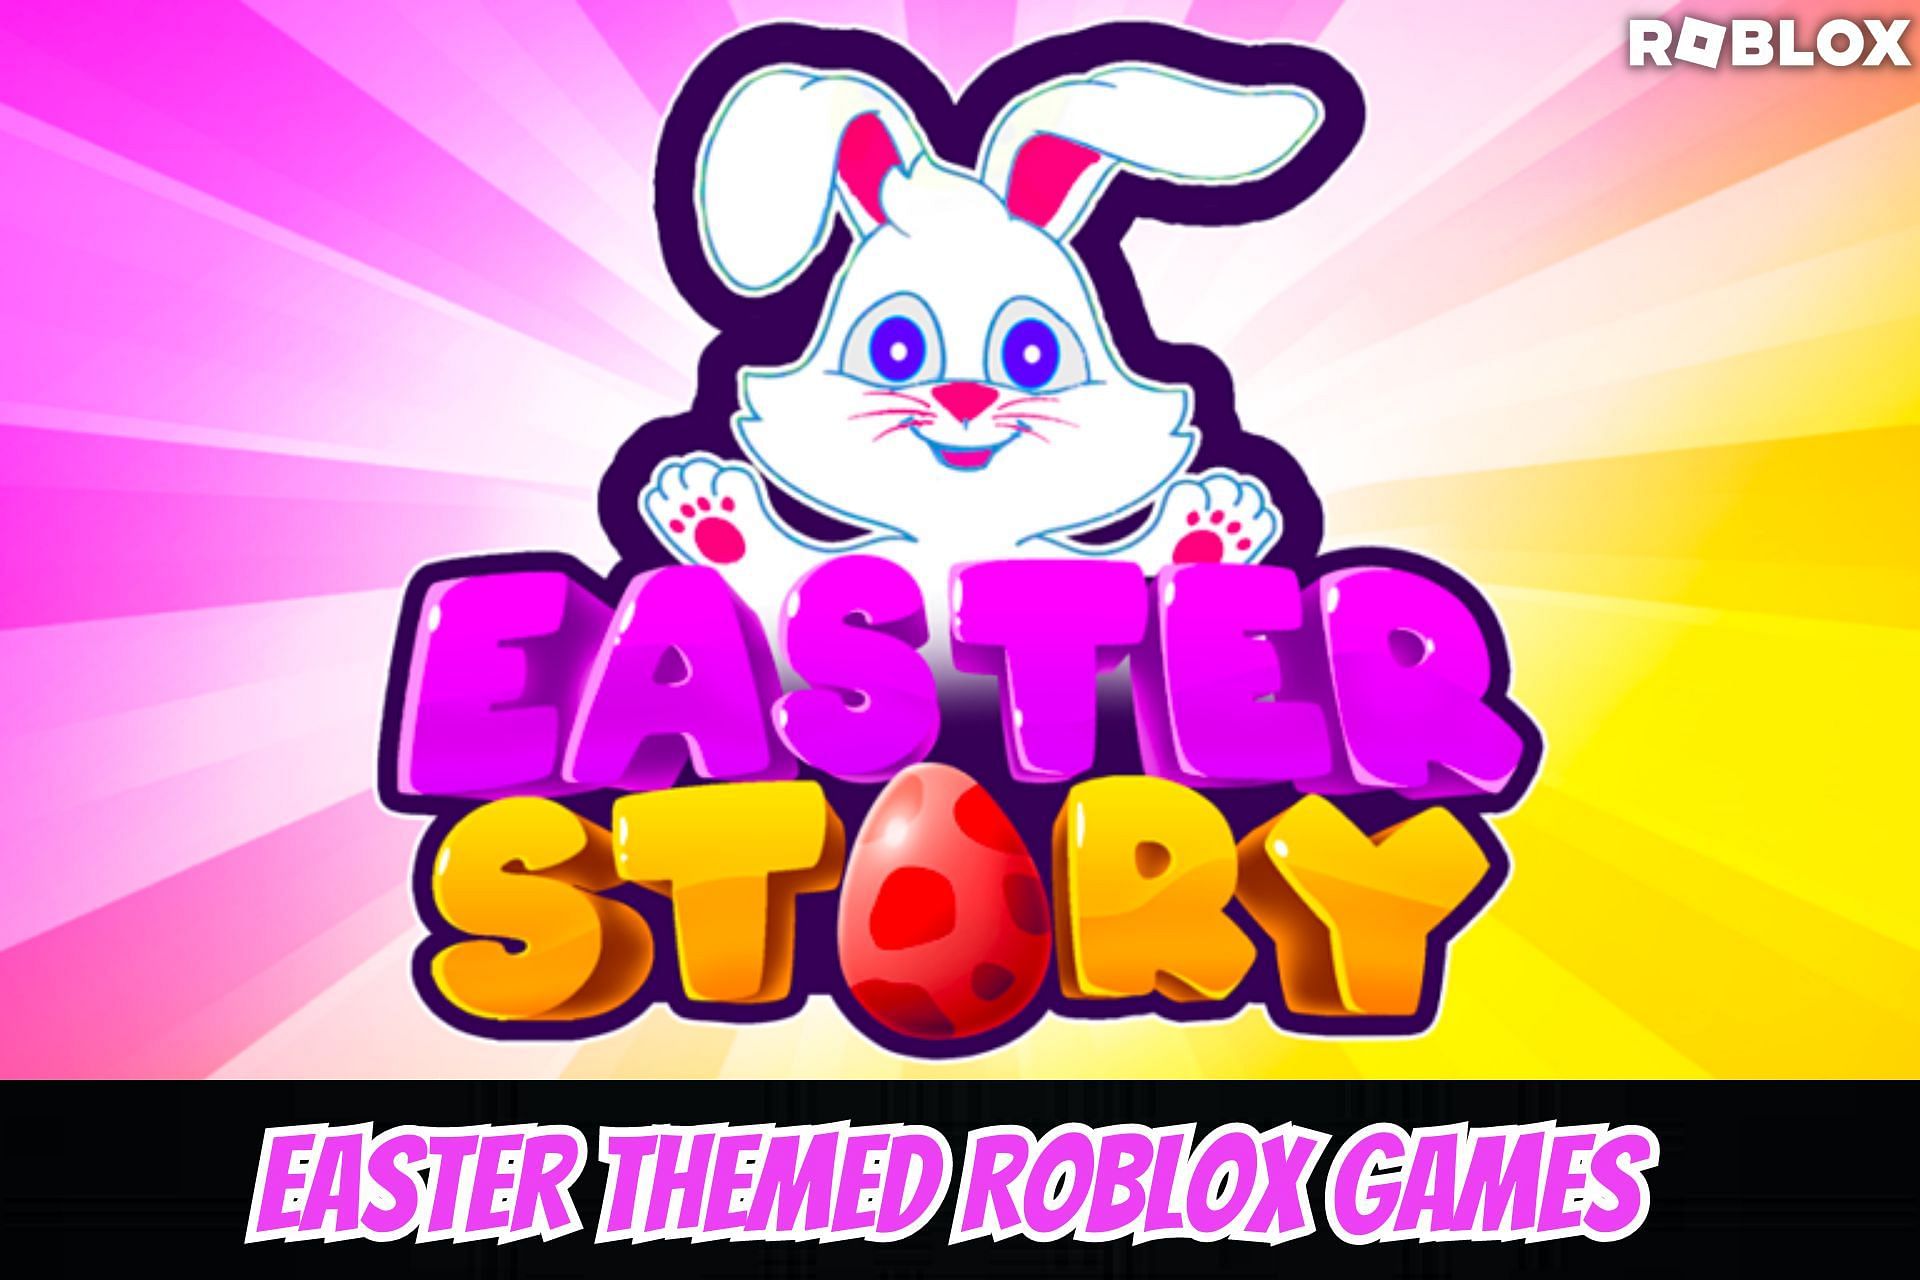 5 Easter themed Roblox games that fit the festive season